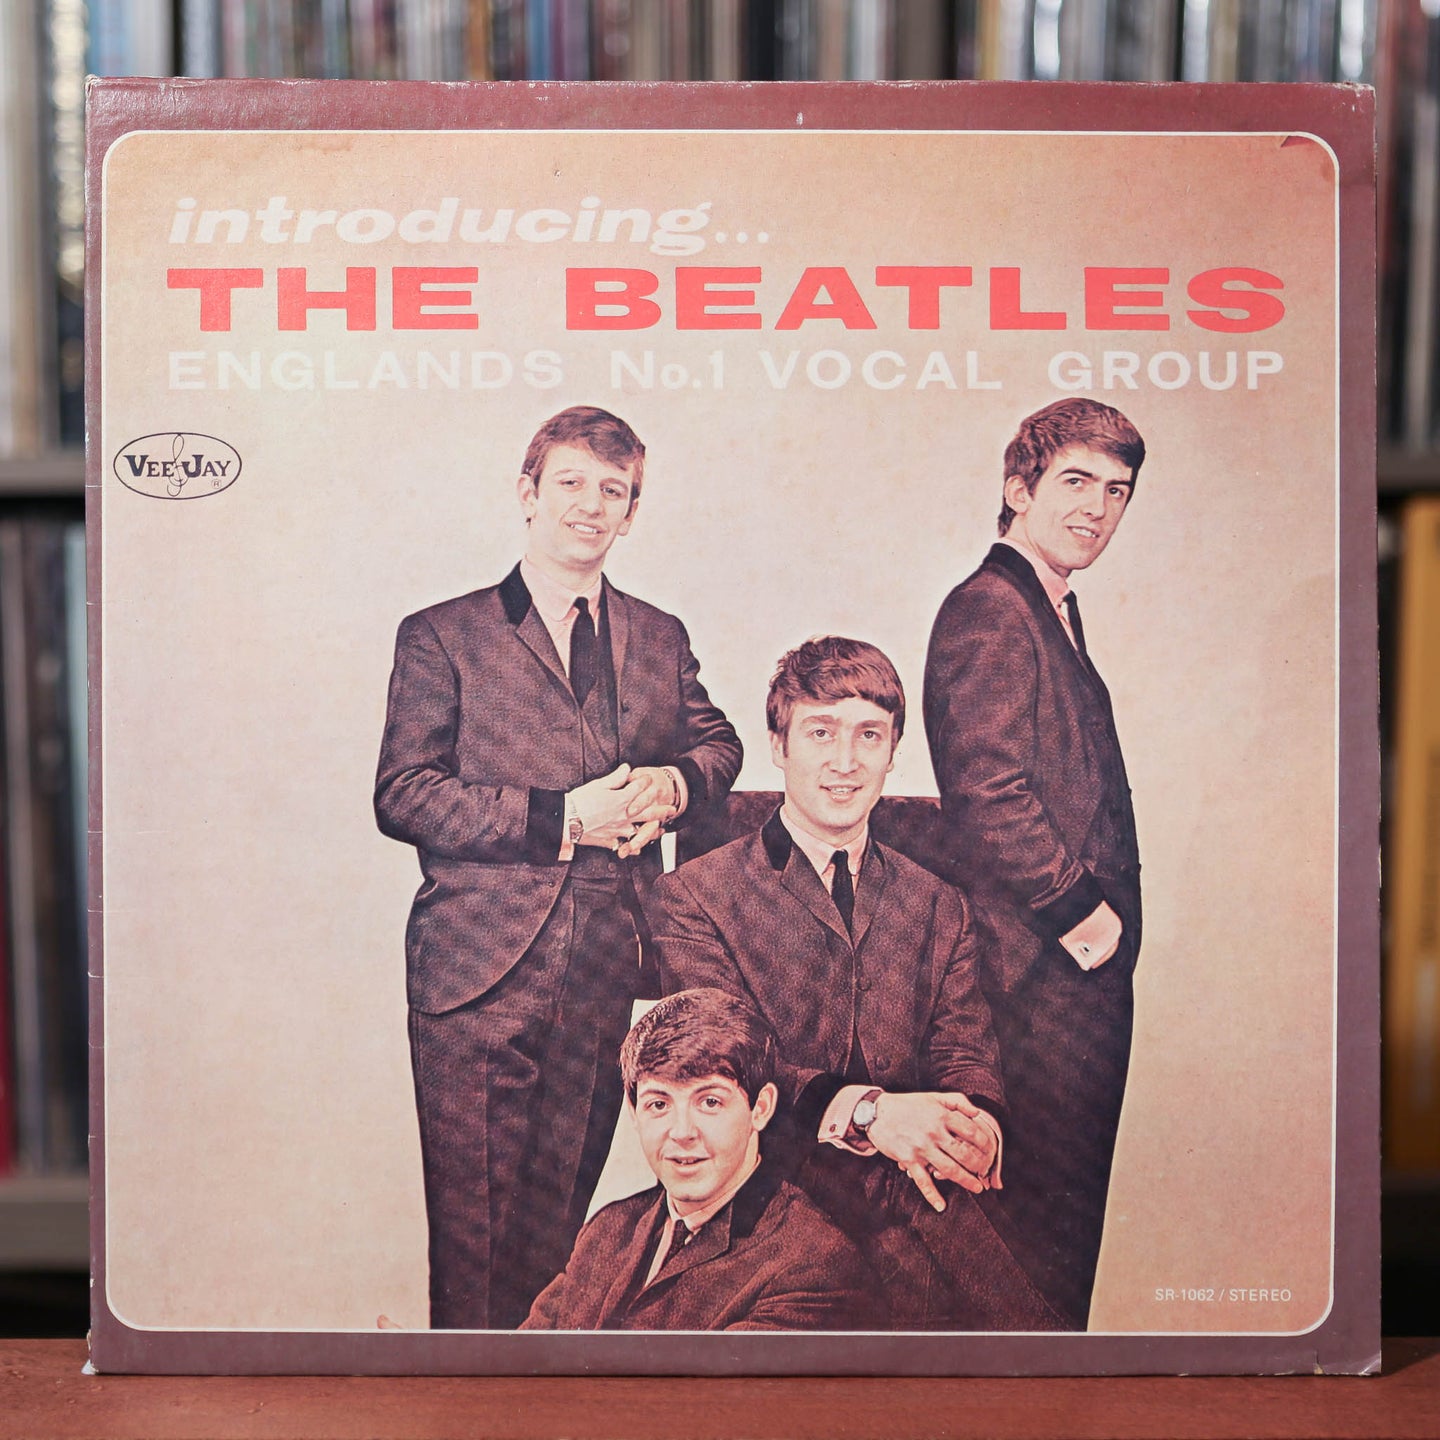 The Beatles - Introducing...The Beatles - 1964 Private Press, VG+/VG+